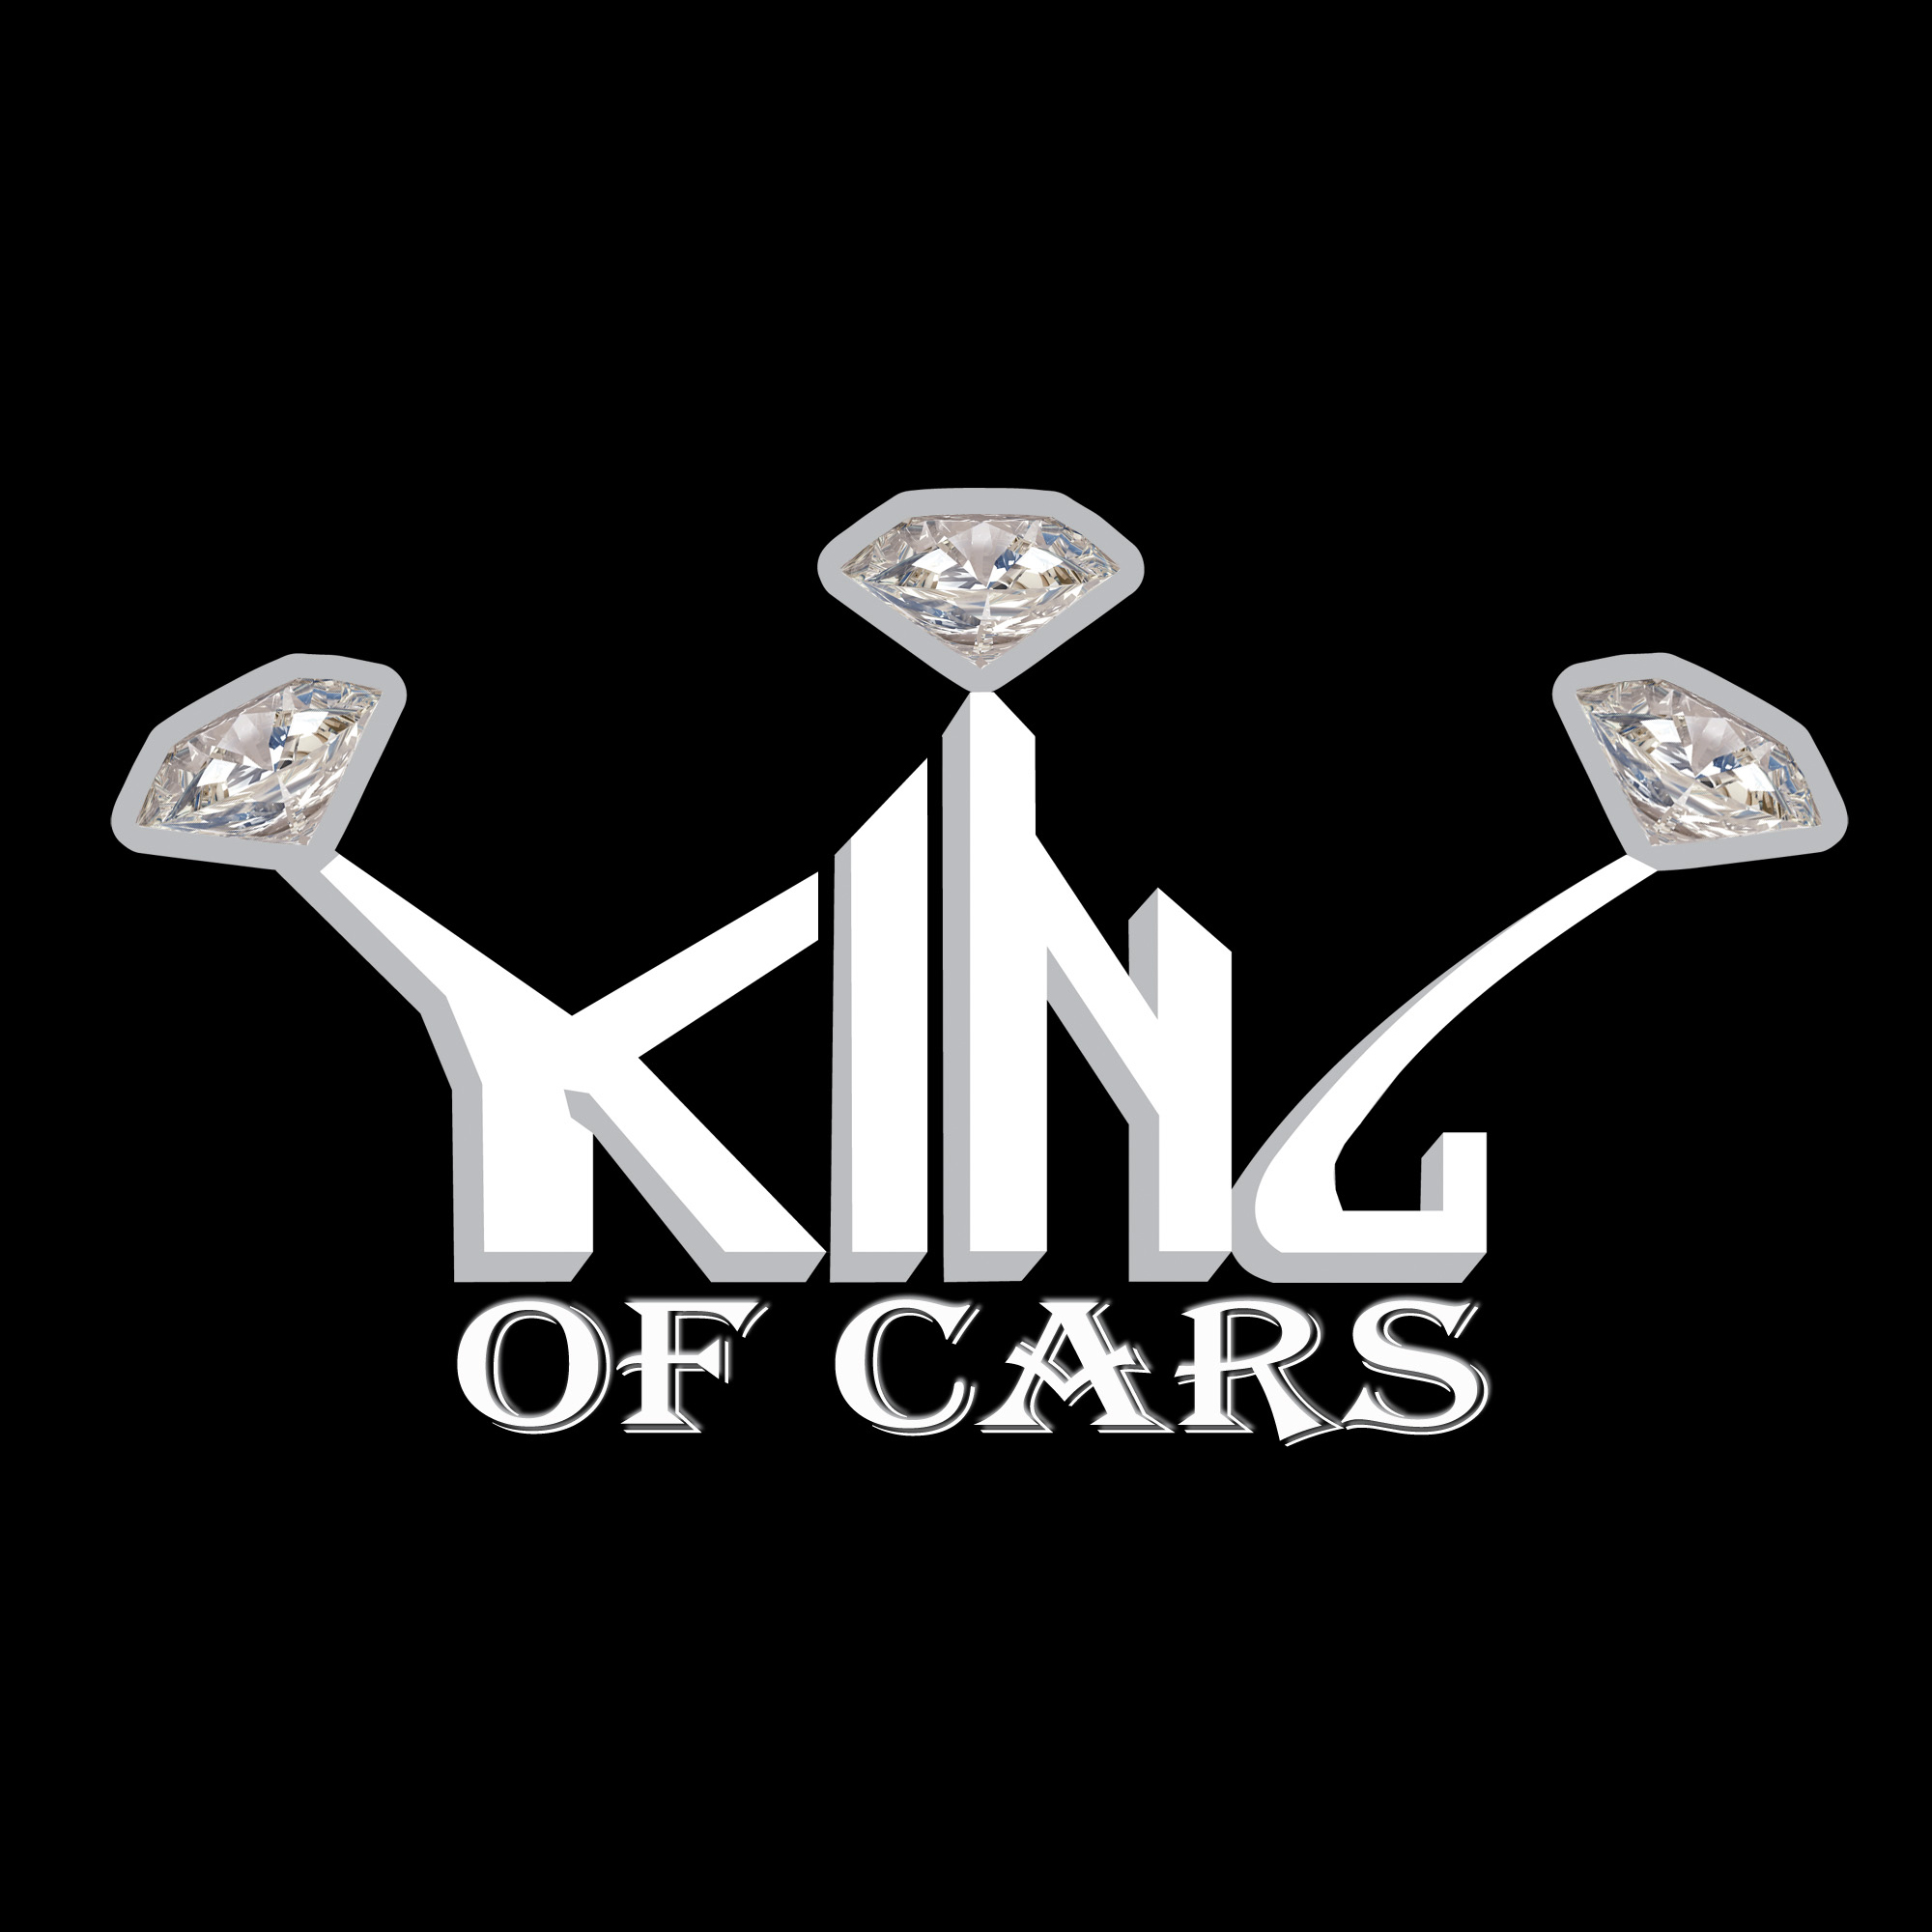 King of Cars